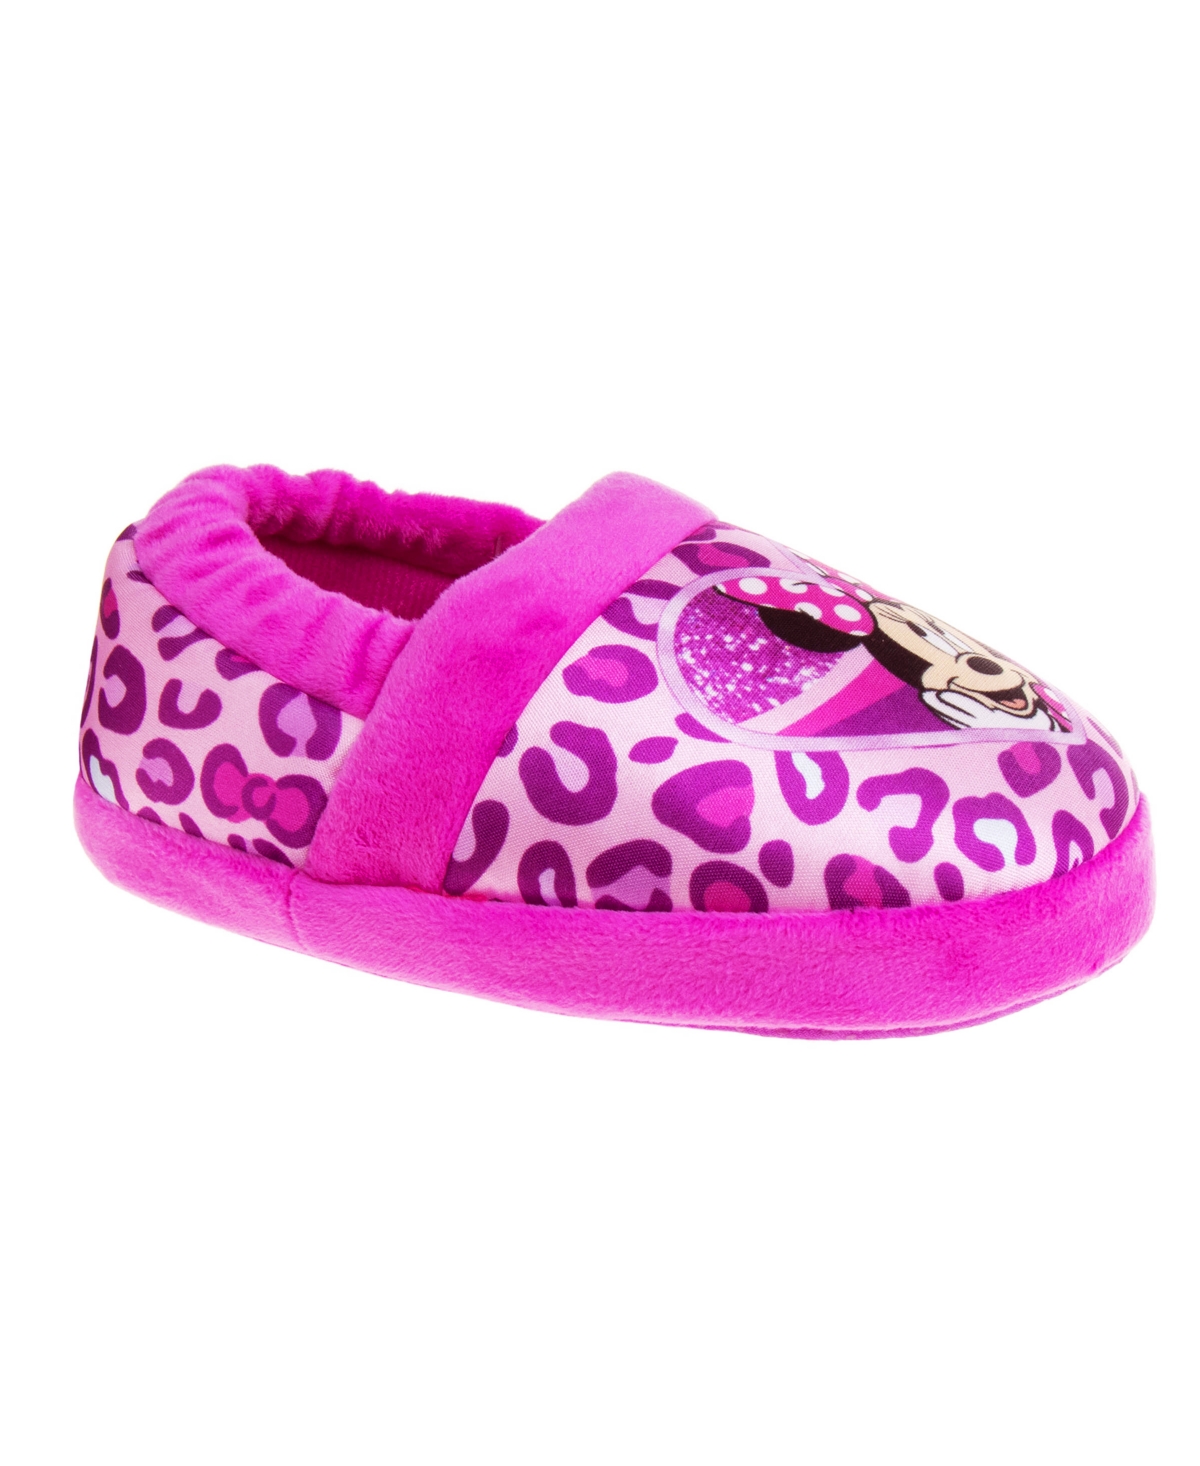 Disney Kids' Little Girls Minnie Mouse Dual Sizes Slippers In Hot Pink,purple